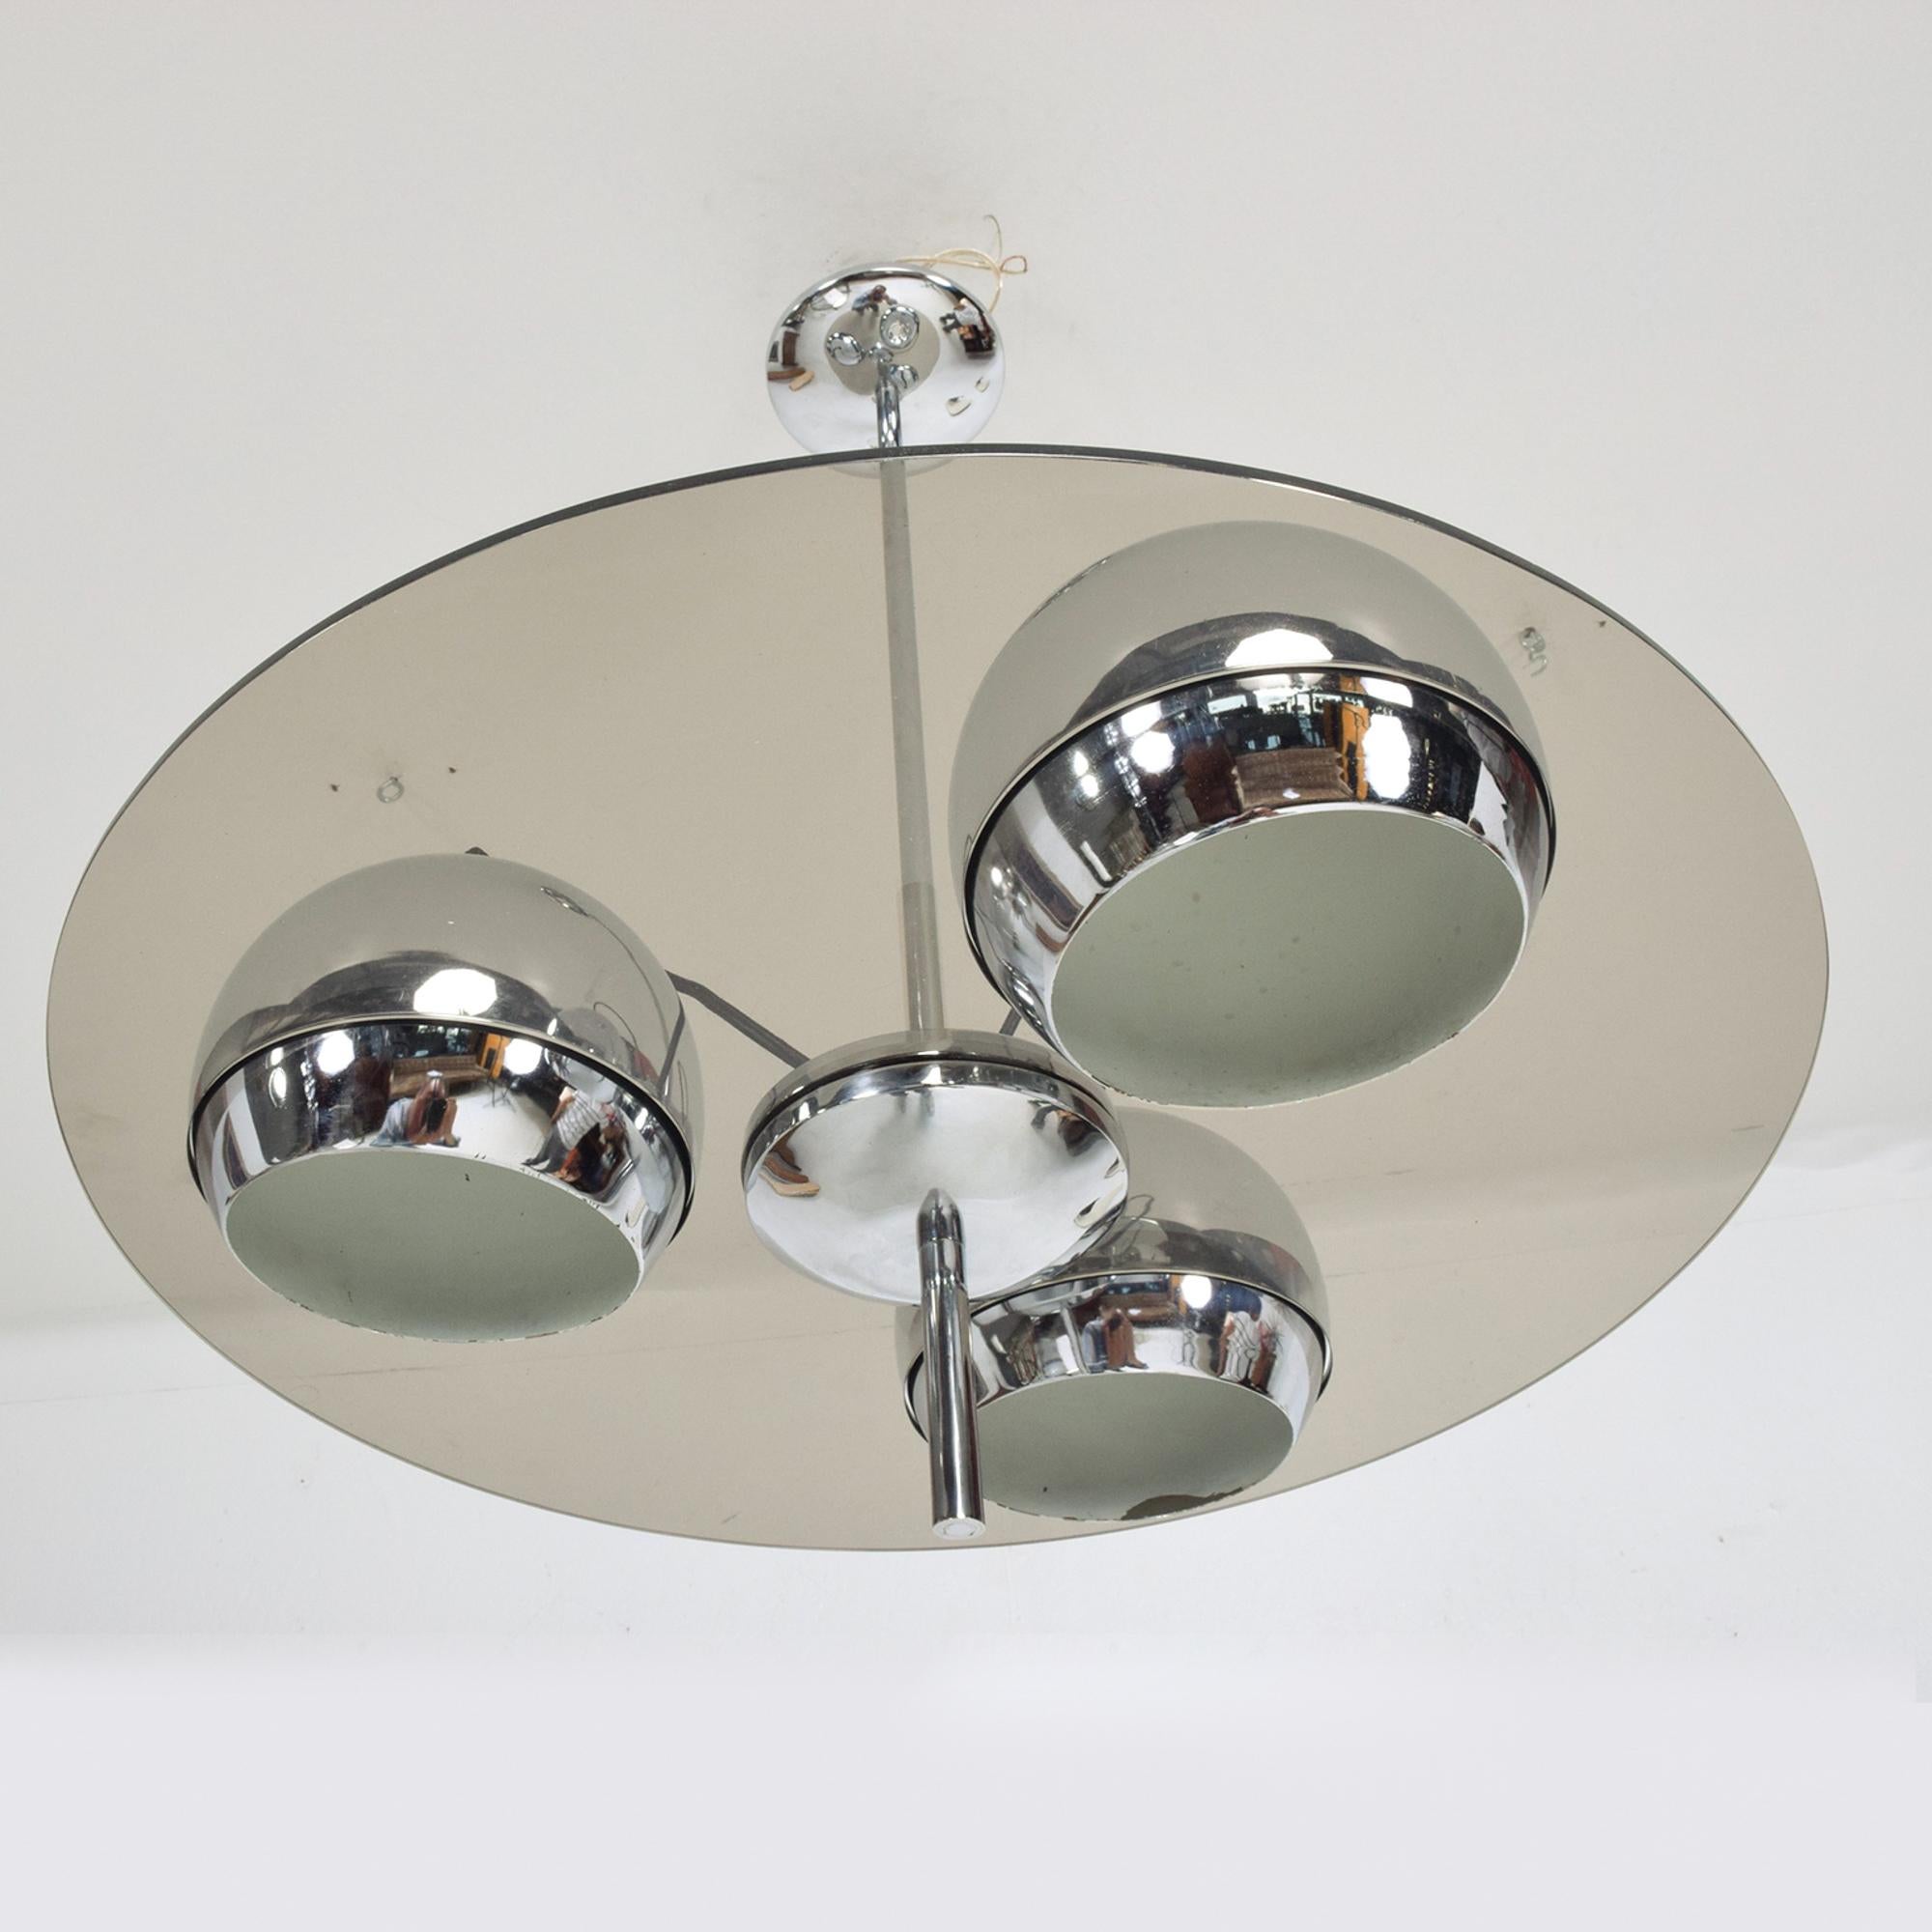 1960s Lightolier Directional 3 Light Globe Pendant Lamp Chrome & Lucite In Good Condition For Sale In Chula Vista, CA